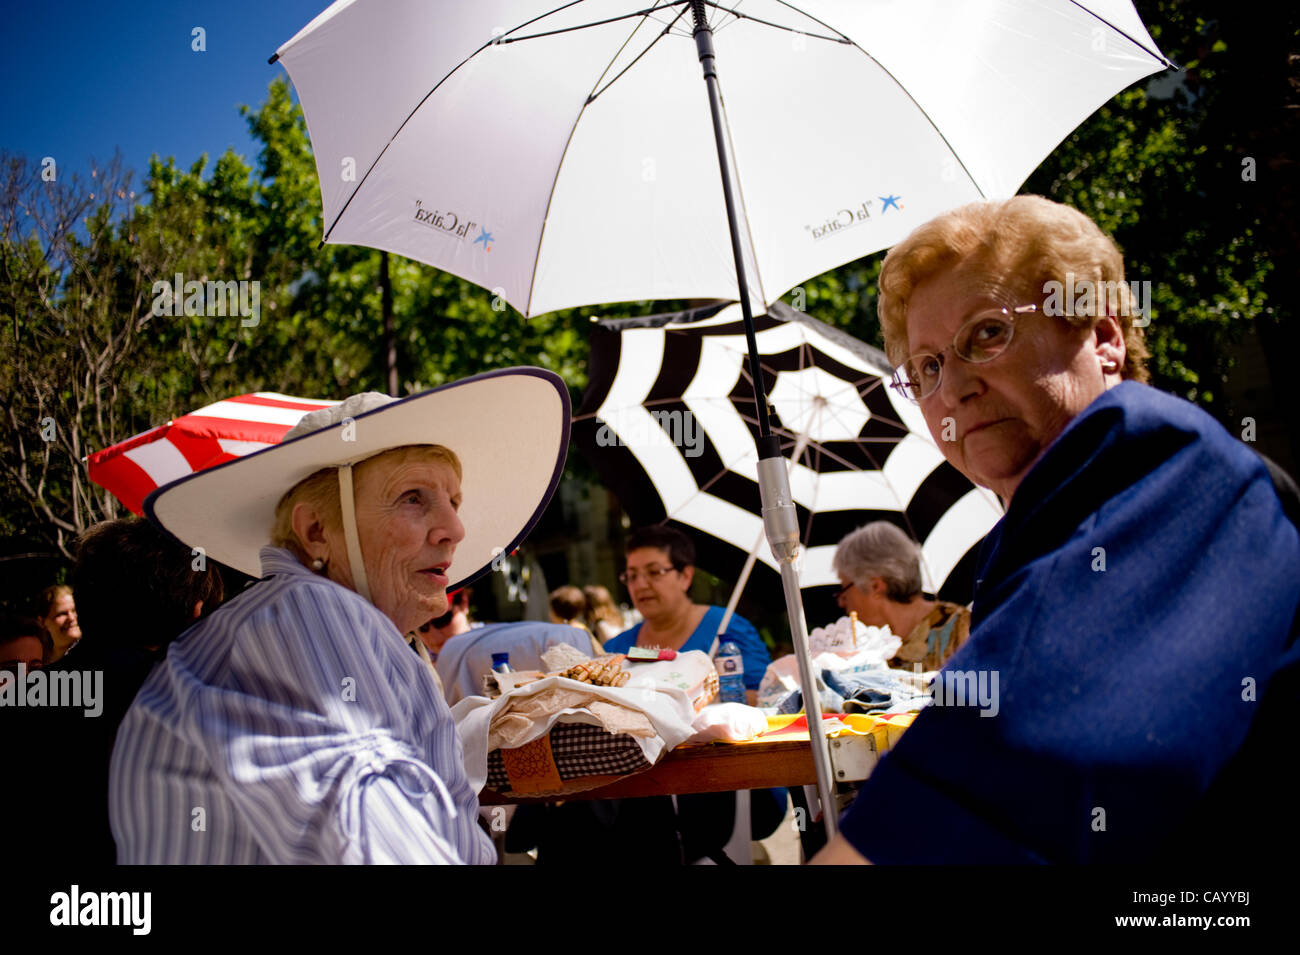 11 May, 2012-Barcelona, Spain. Women cover the hot sun with hats and umbrellas during the 11th Meeting of lace makers in Barcelona. 350 lace makers have gathered in the Rambla del Raval as part of the celebrations that are held by the festival of Sant Ponç (St. Pontius) (Credit Image: Jordi Boixareu Stock Photo